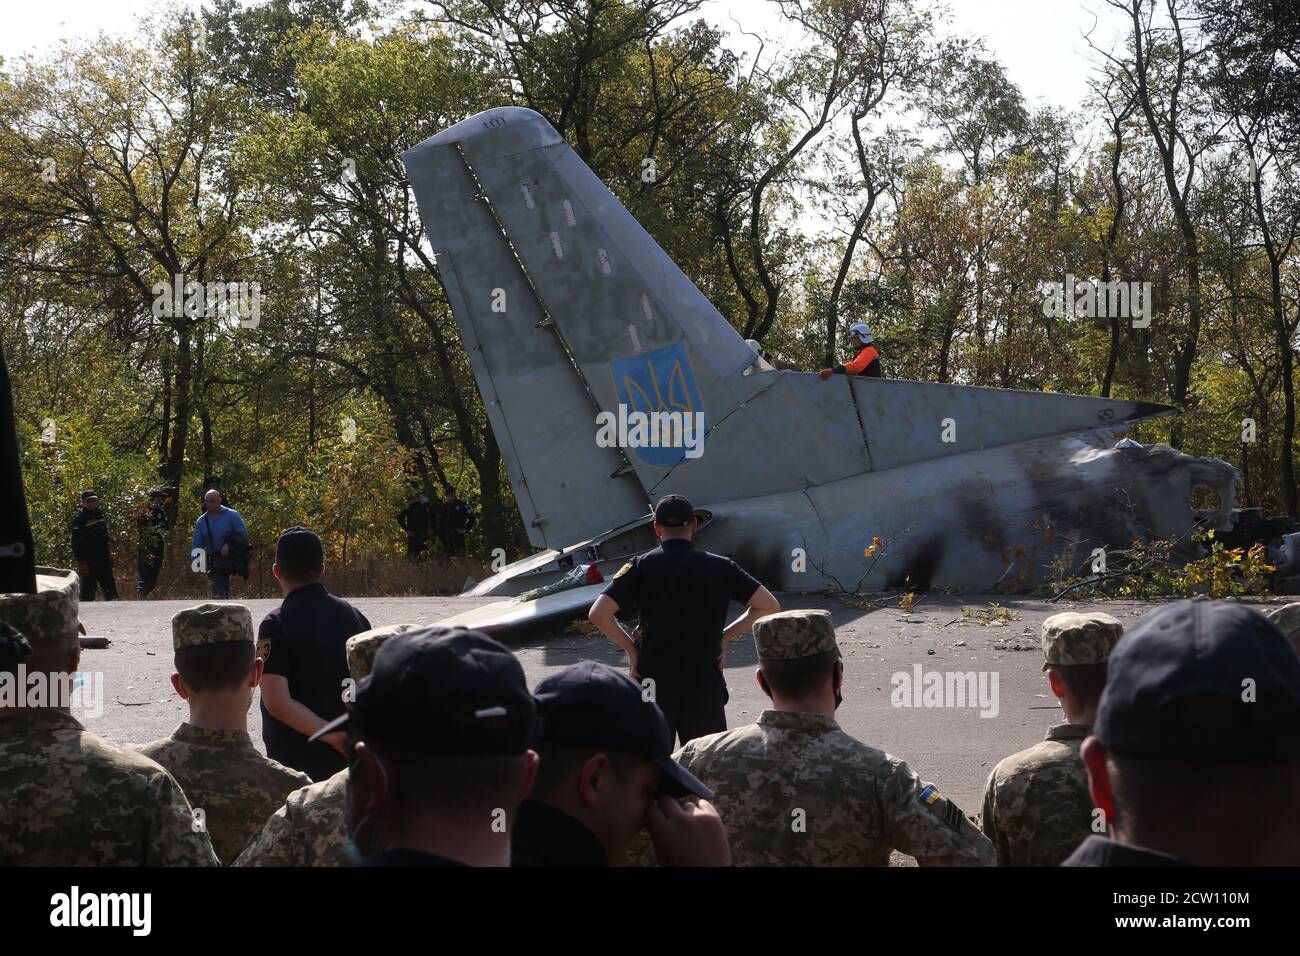 (200926) -- KHARKIV, Sept. 26, 2020 (Xinhua) -- Rescuers cut the wreckage of the crashed An-26 military aircraft into parts in Chuguev, Kharkiv region, Ukraine, Sept. 26, 2020. The death toll from the Ukrainian military plane crash rose to 26, after one of the two people with serious condition died in hospital, the State Emergency Service of Ukraine said on Saturday. The An-26 military aircraft with 27 people on board crashed on Friday. The plane was performing a training flight and was landing at the airfield of a military base near the city of Chuguev, Kharkiv region. (Photo by Sergey Sta Stock Photo